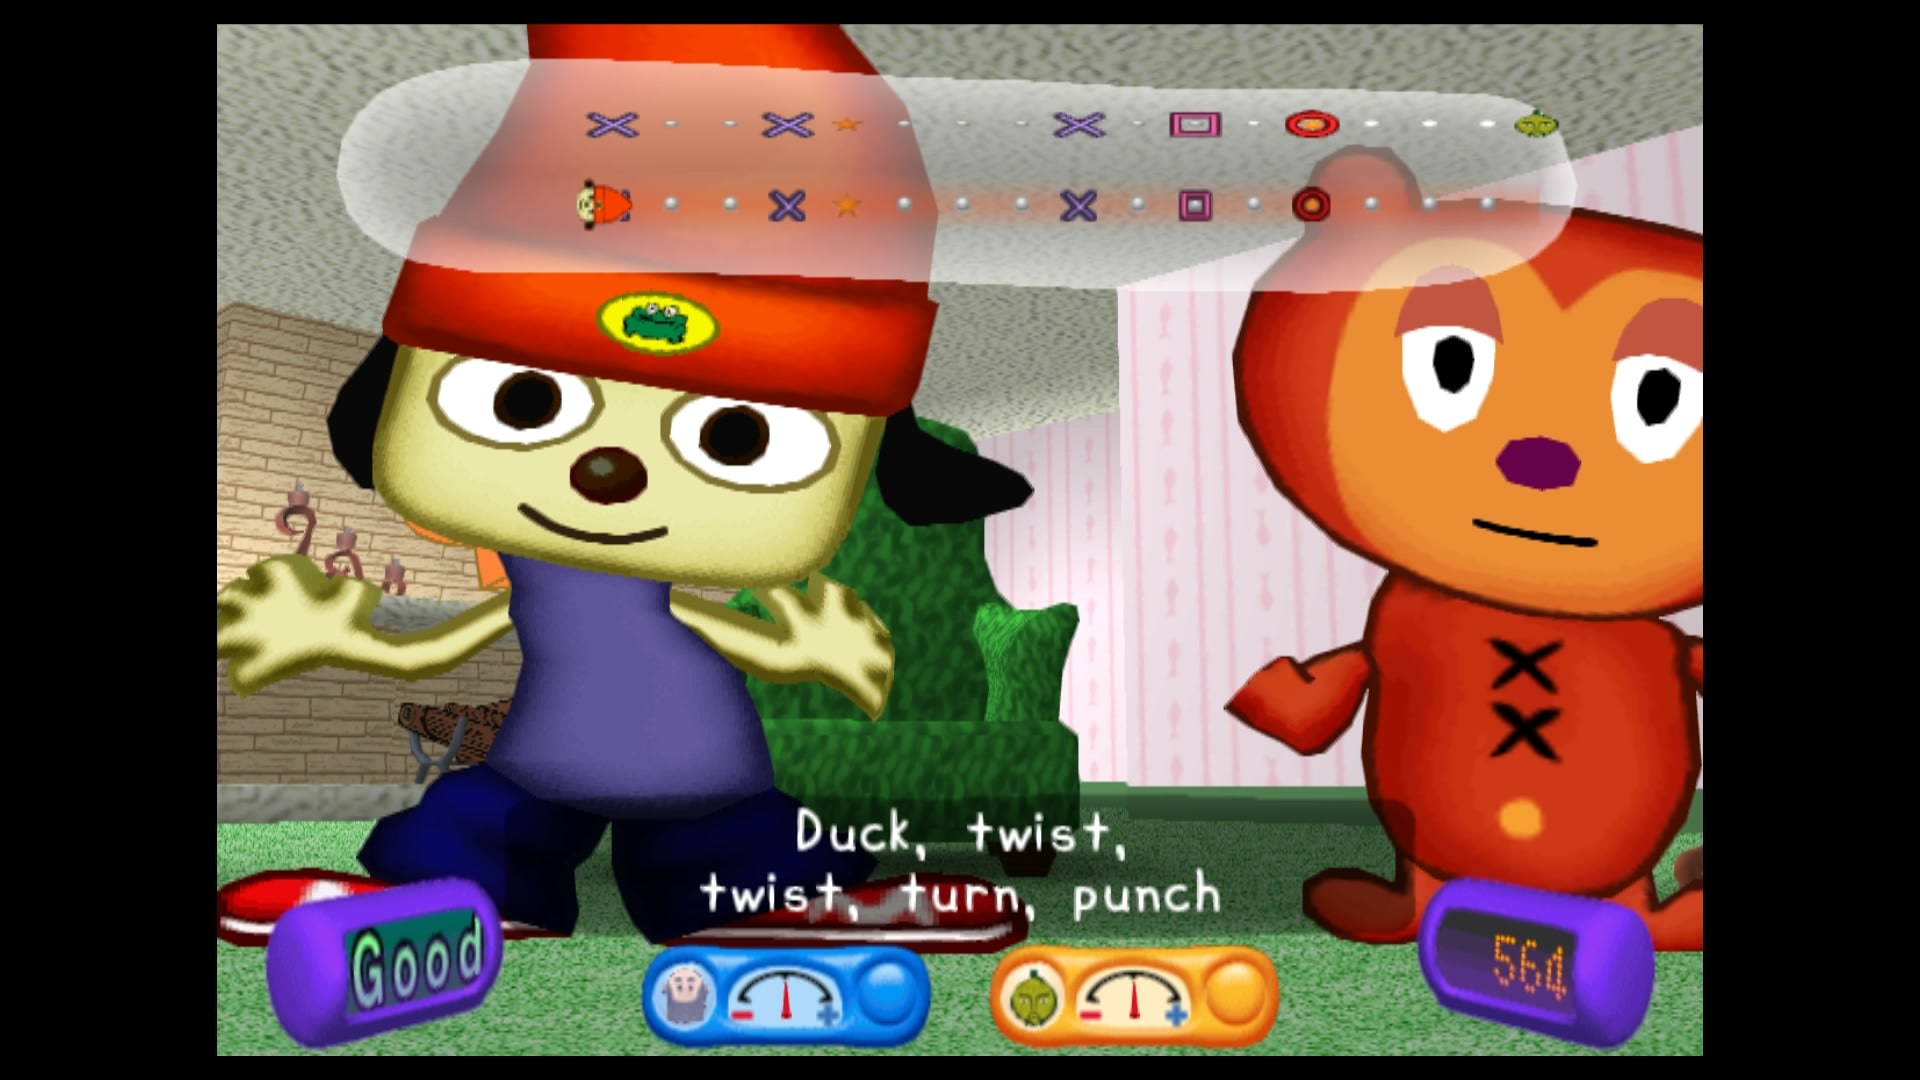 PaRappa the Rapper 2 Launching on PlayStation 4 Next Week